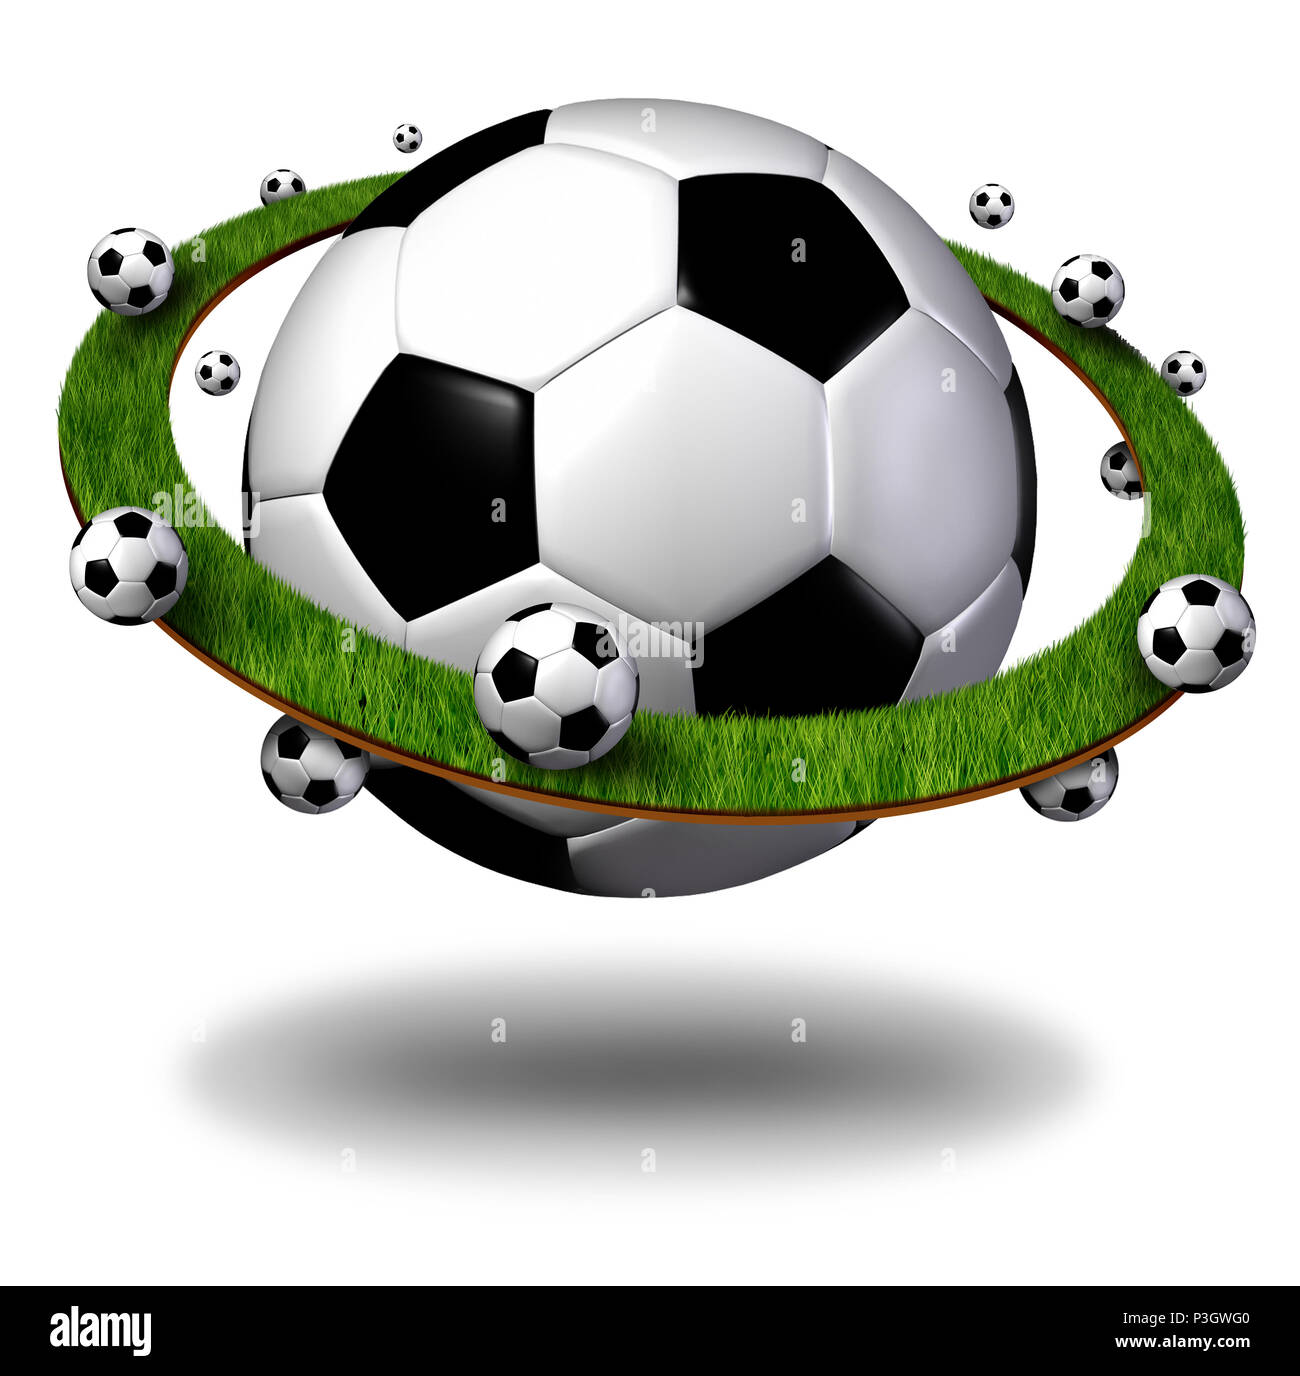 Global soccer symbol and international football concept as a planet shaped ball with grass field ring with balls as a world sport competition. Stock Photo